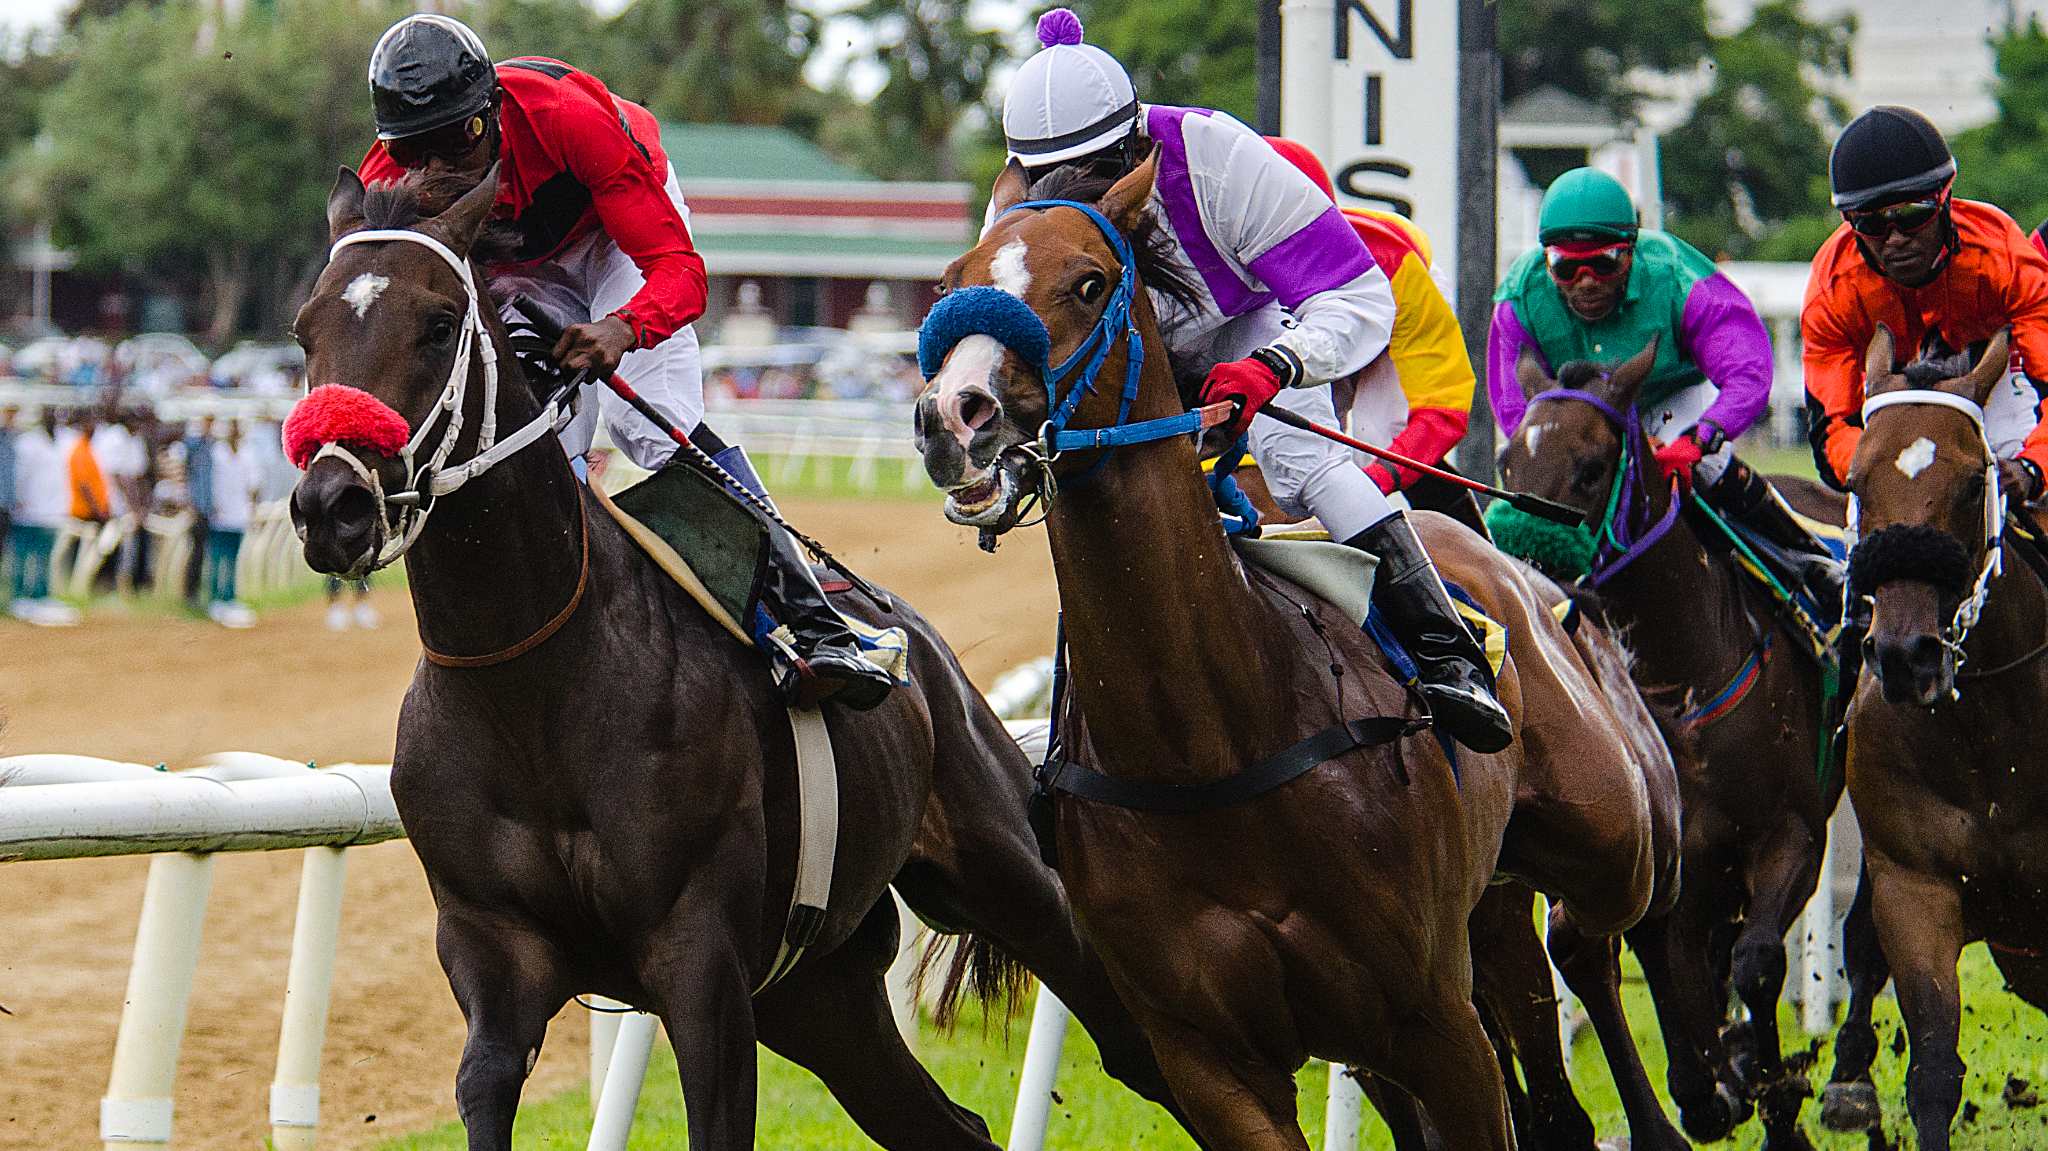 Horse Racing at the Barbados Turf Club by Patrick Bennett